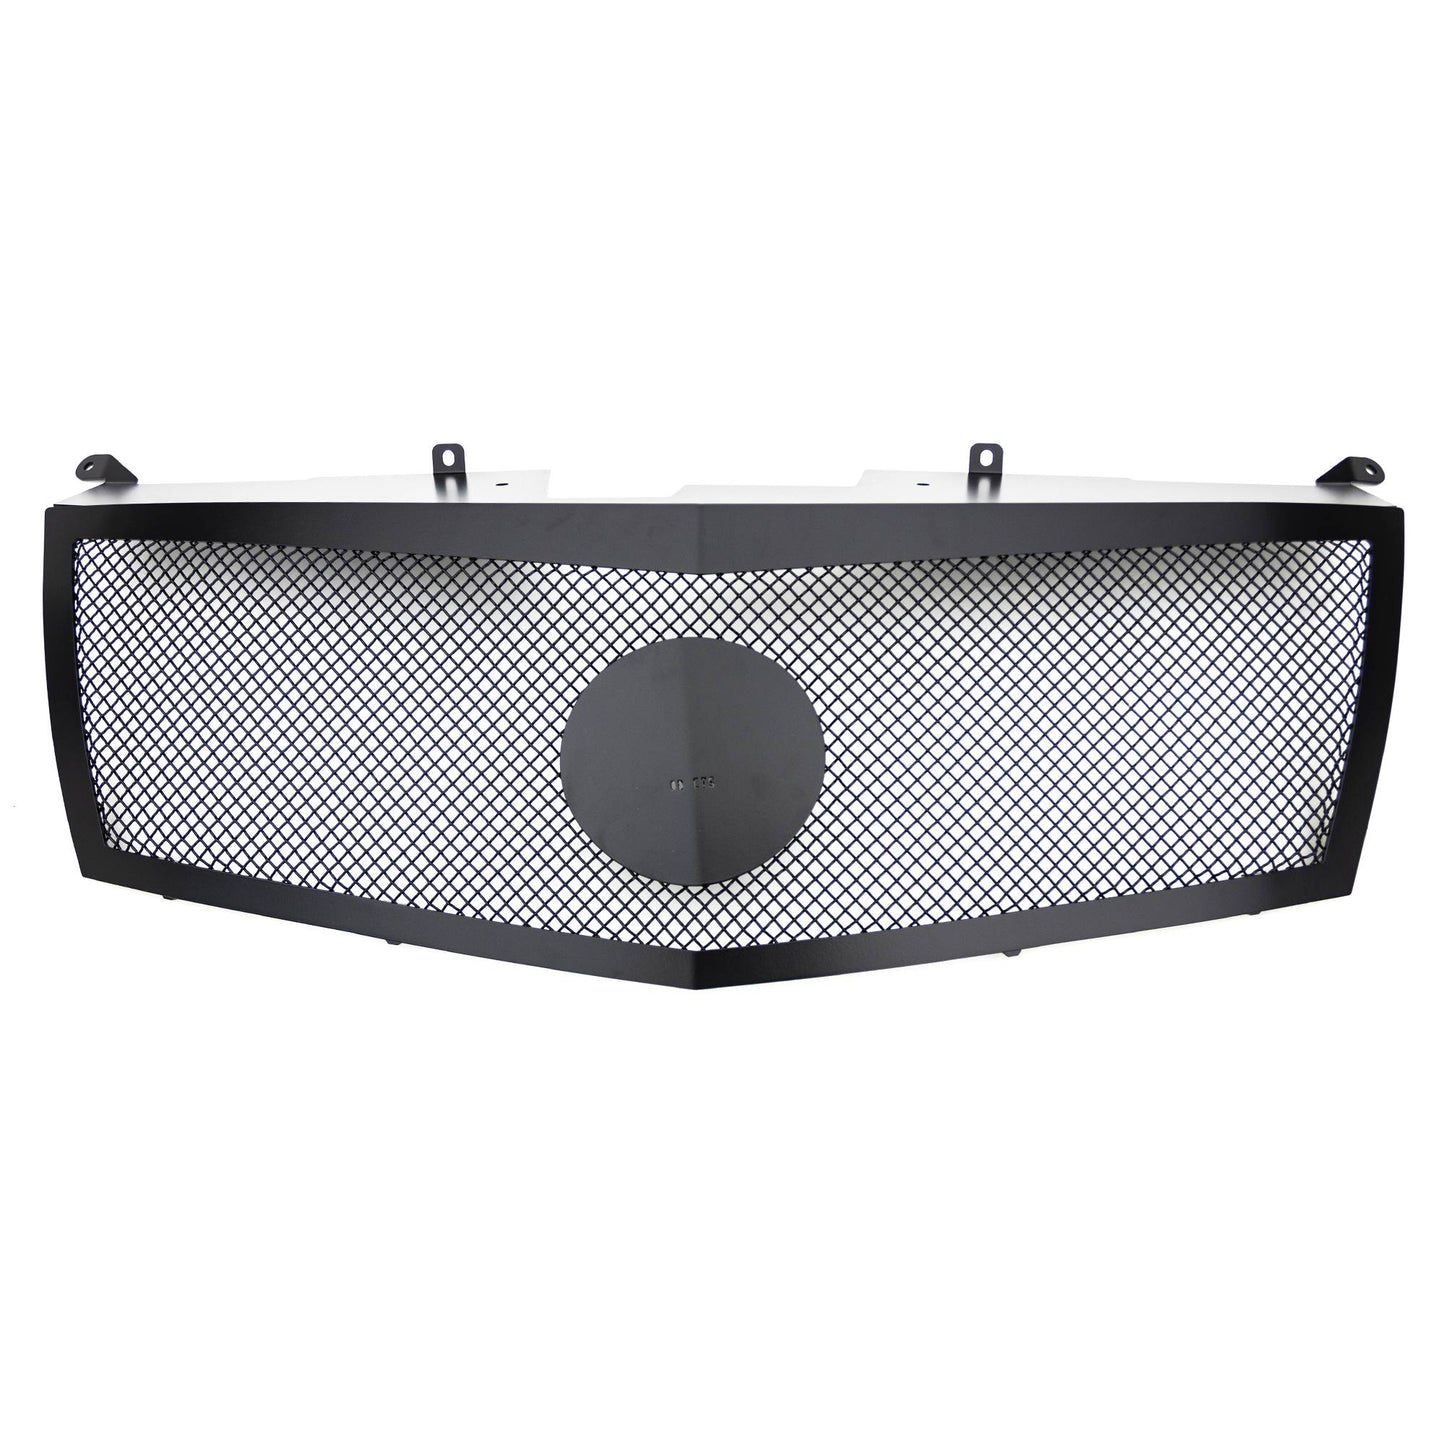 T-REX Grilles 51197 Black Mild Steel Small Mesh Grille Fits 2008-2013 Cadillac CTS CTS Coupe CTS Sport CTS Sport Wagon